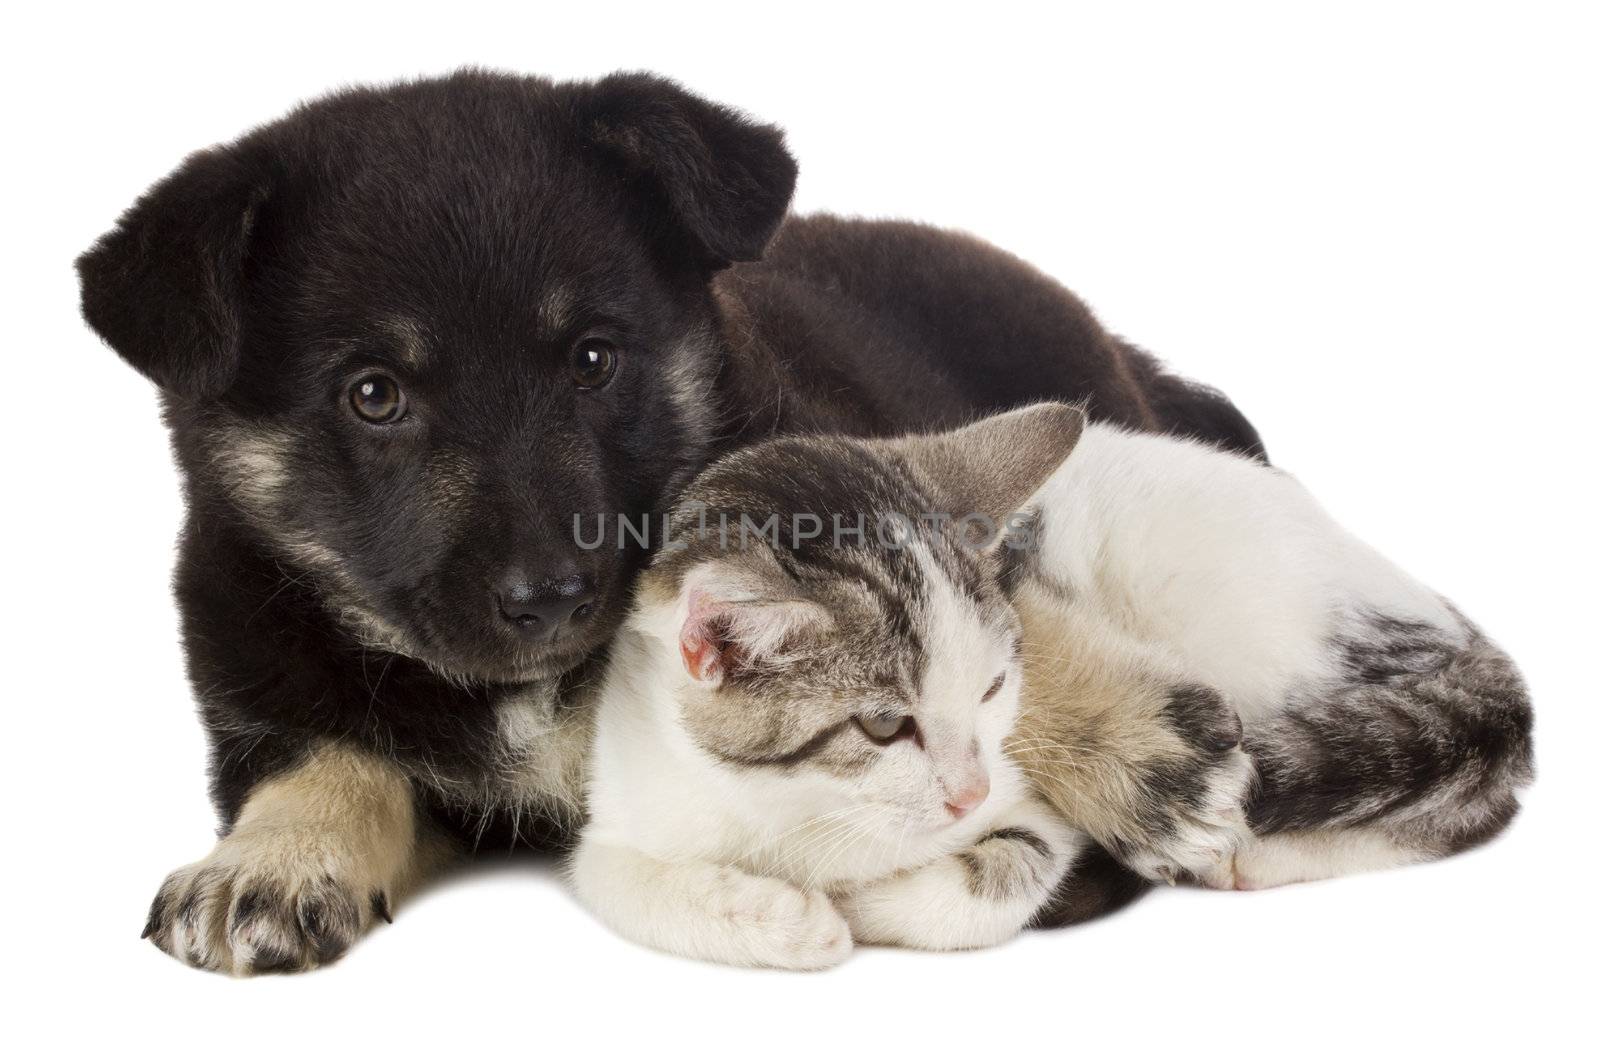 puppy and cat by Alekcey